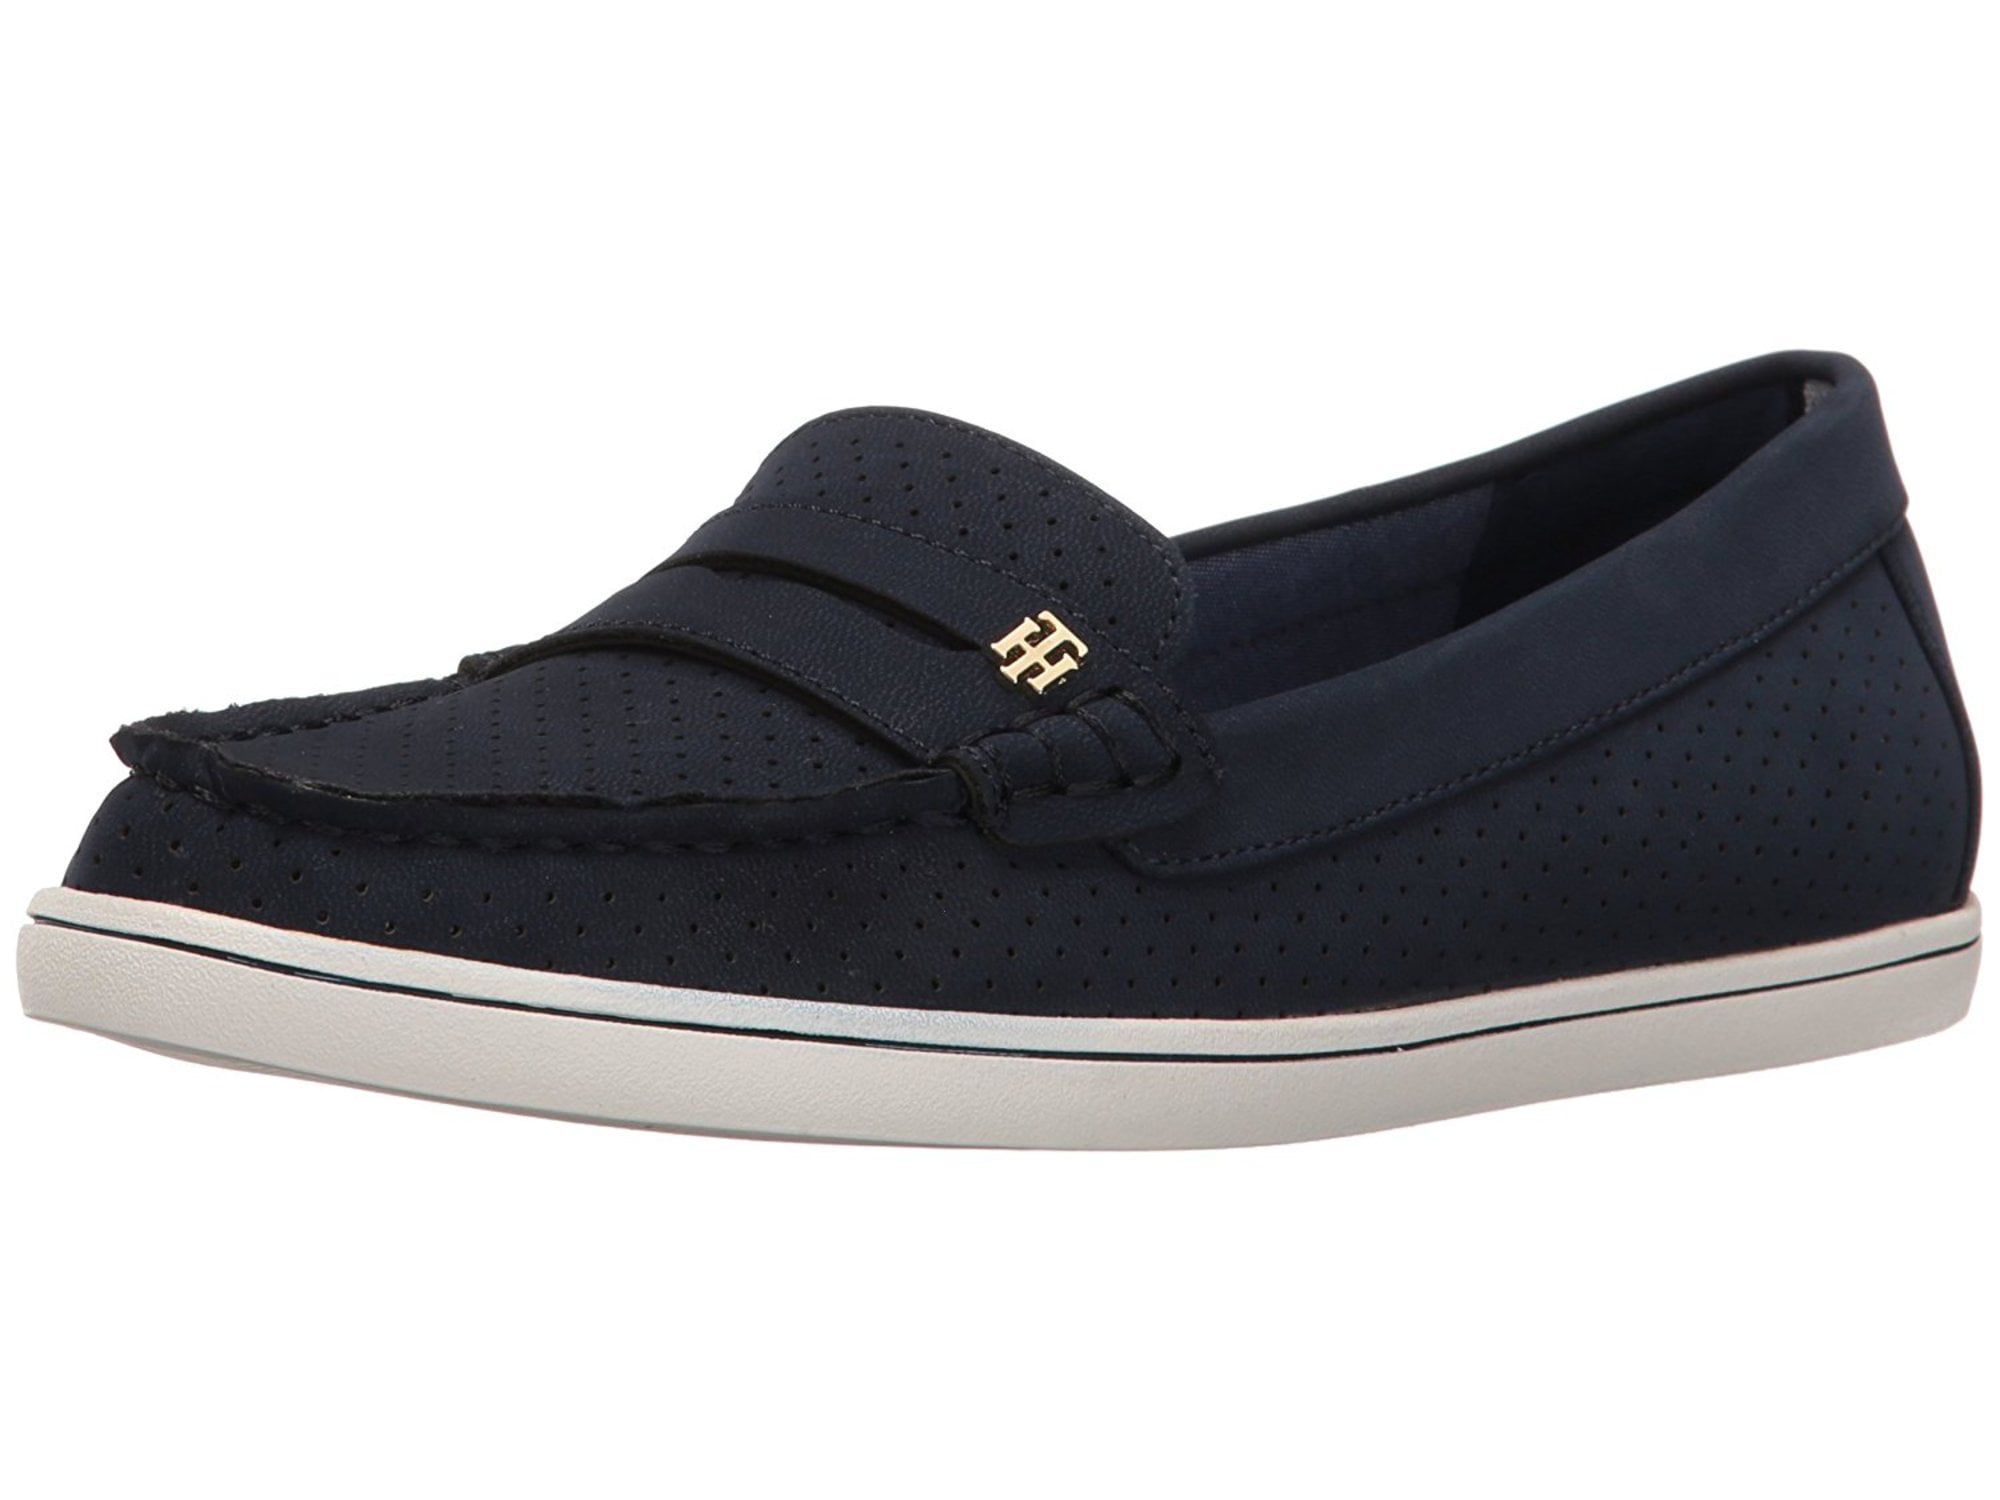 Tommy Hilfiger Womens Butter5 Closed Toe Loafers - Walmart.com